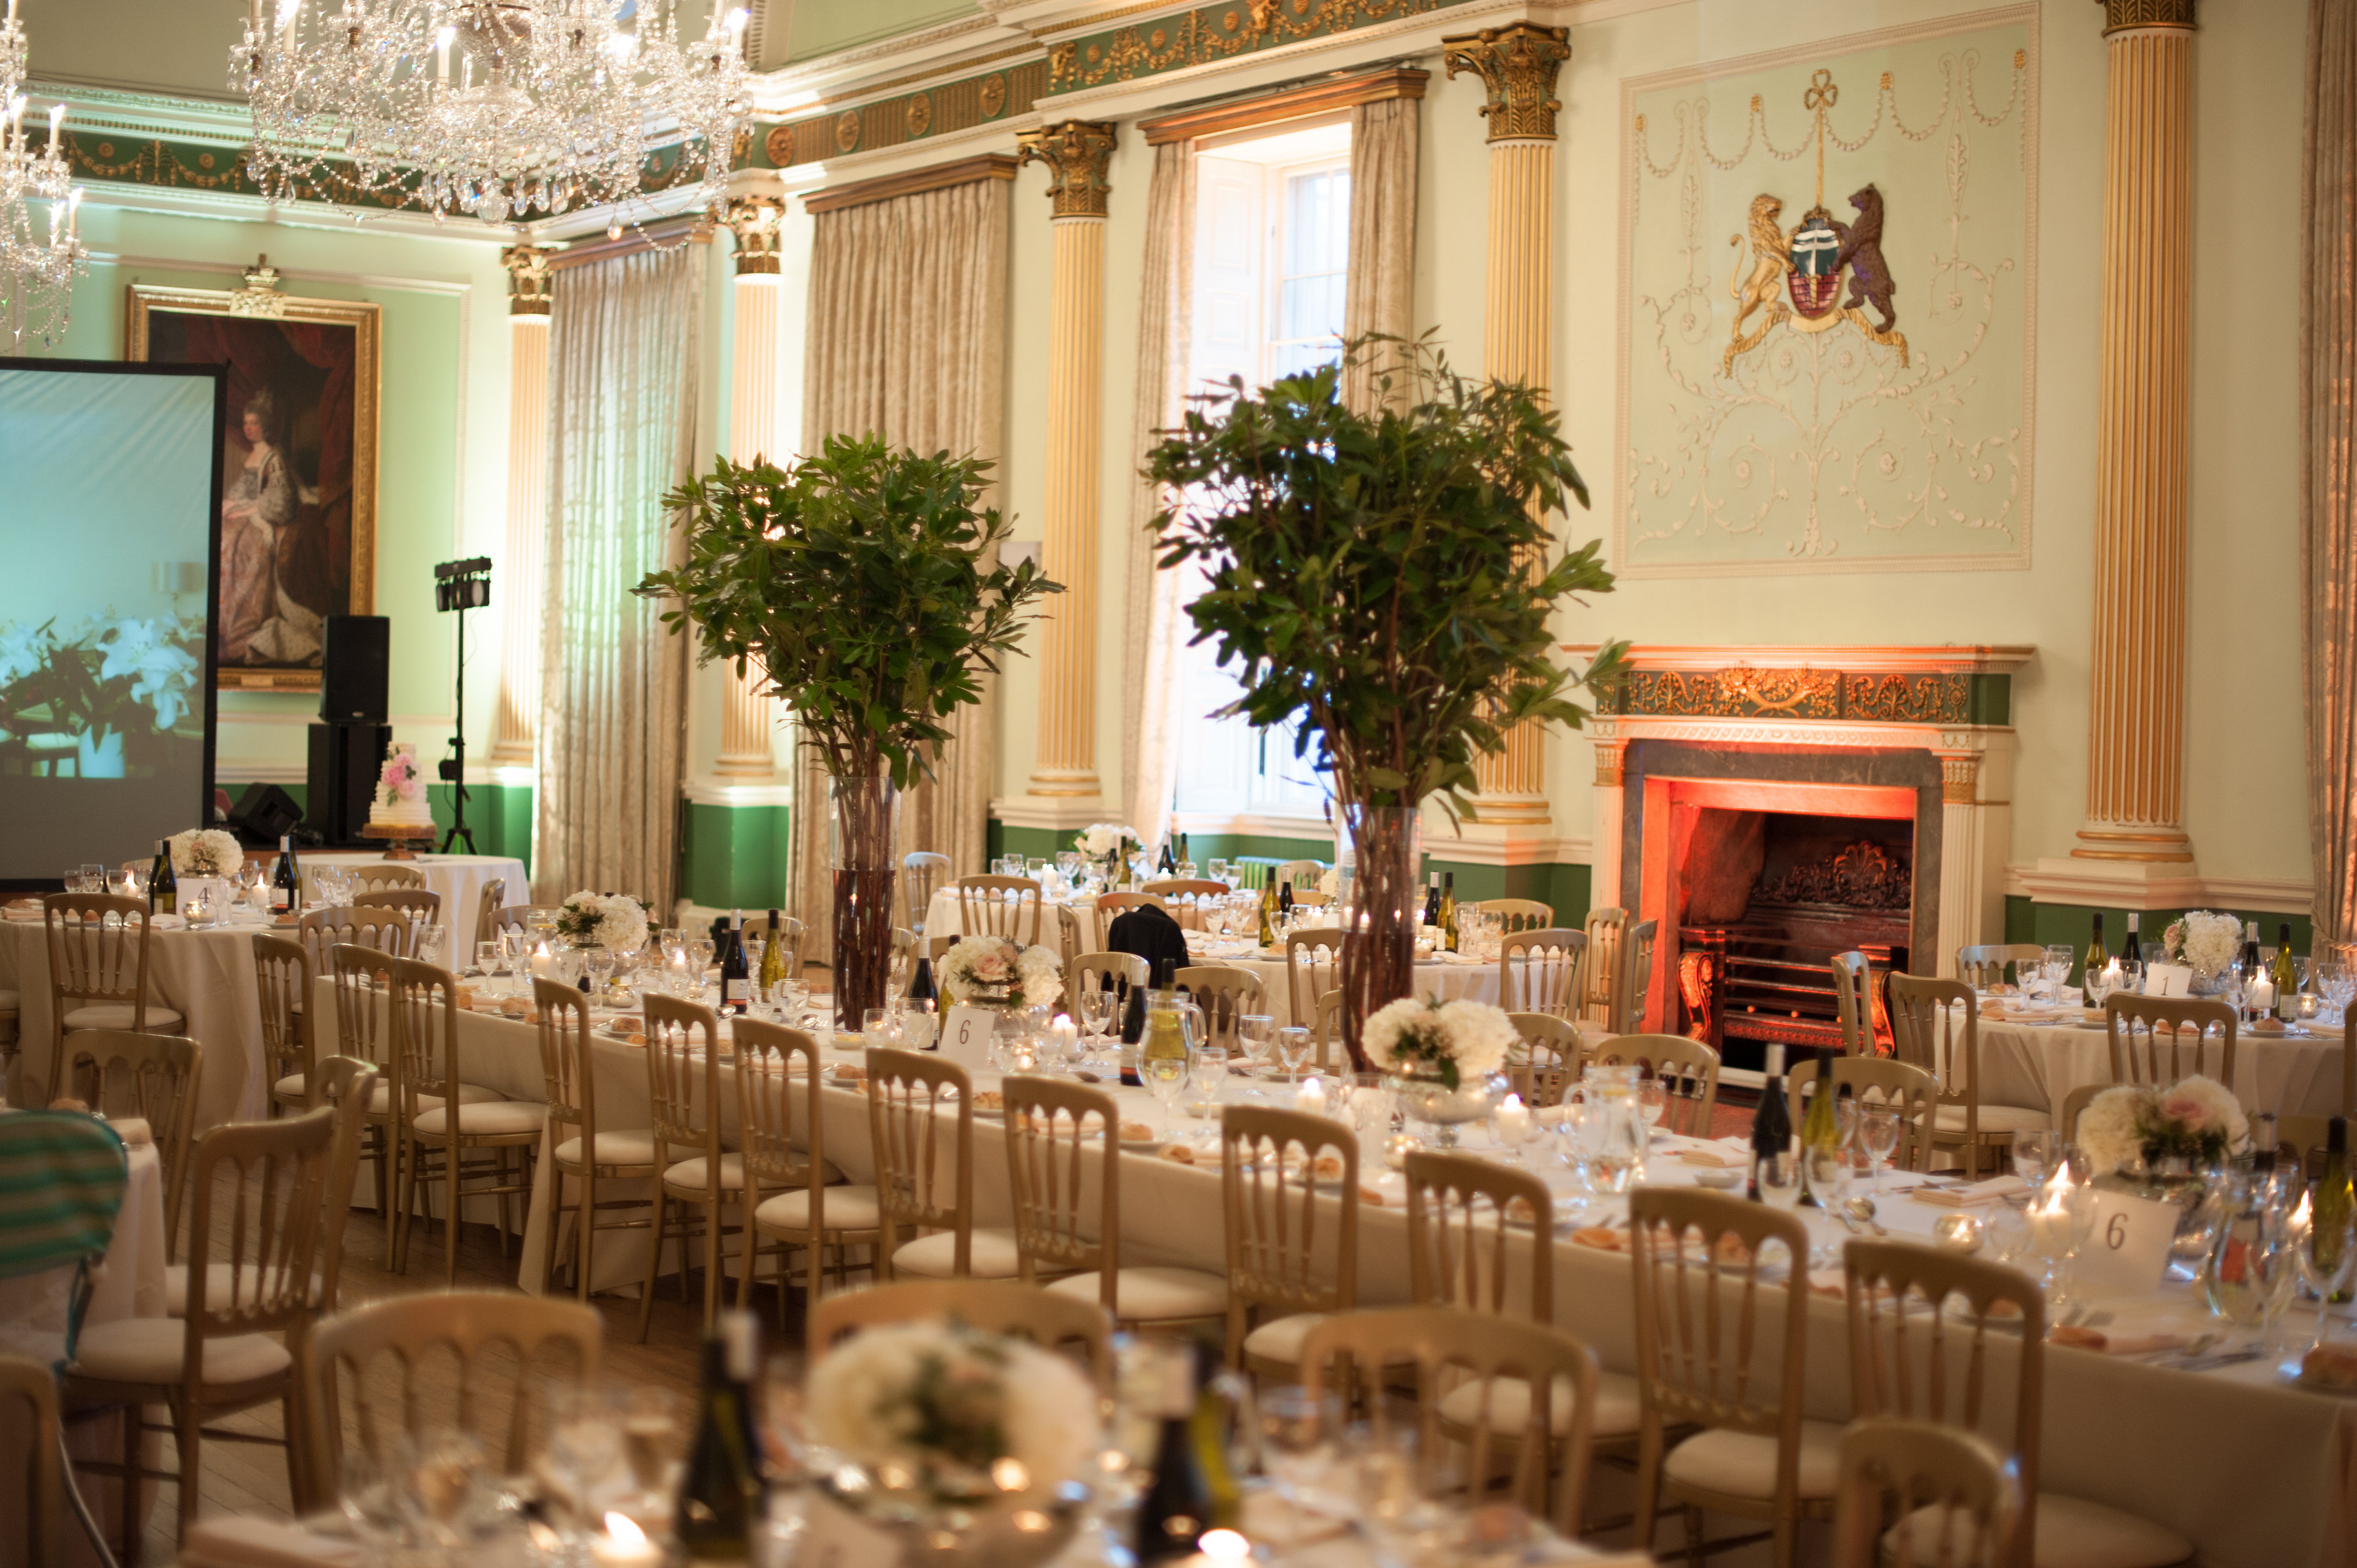 Long table in the Banqueting Room